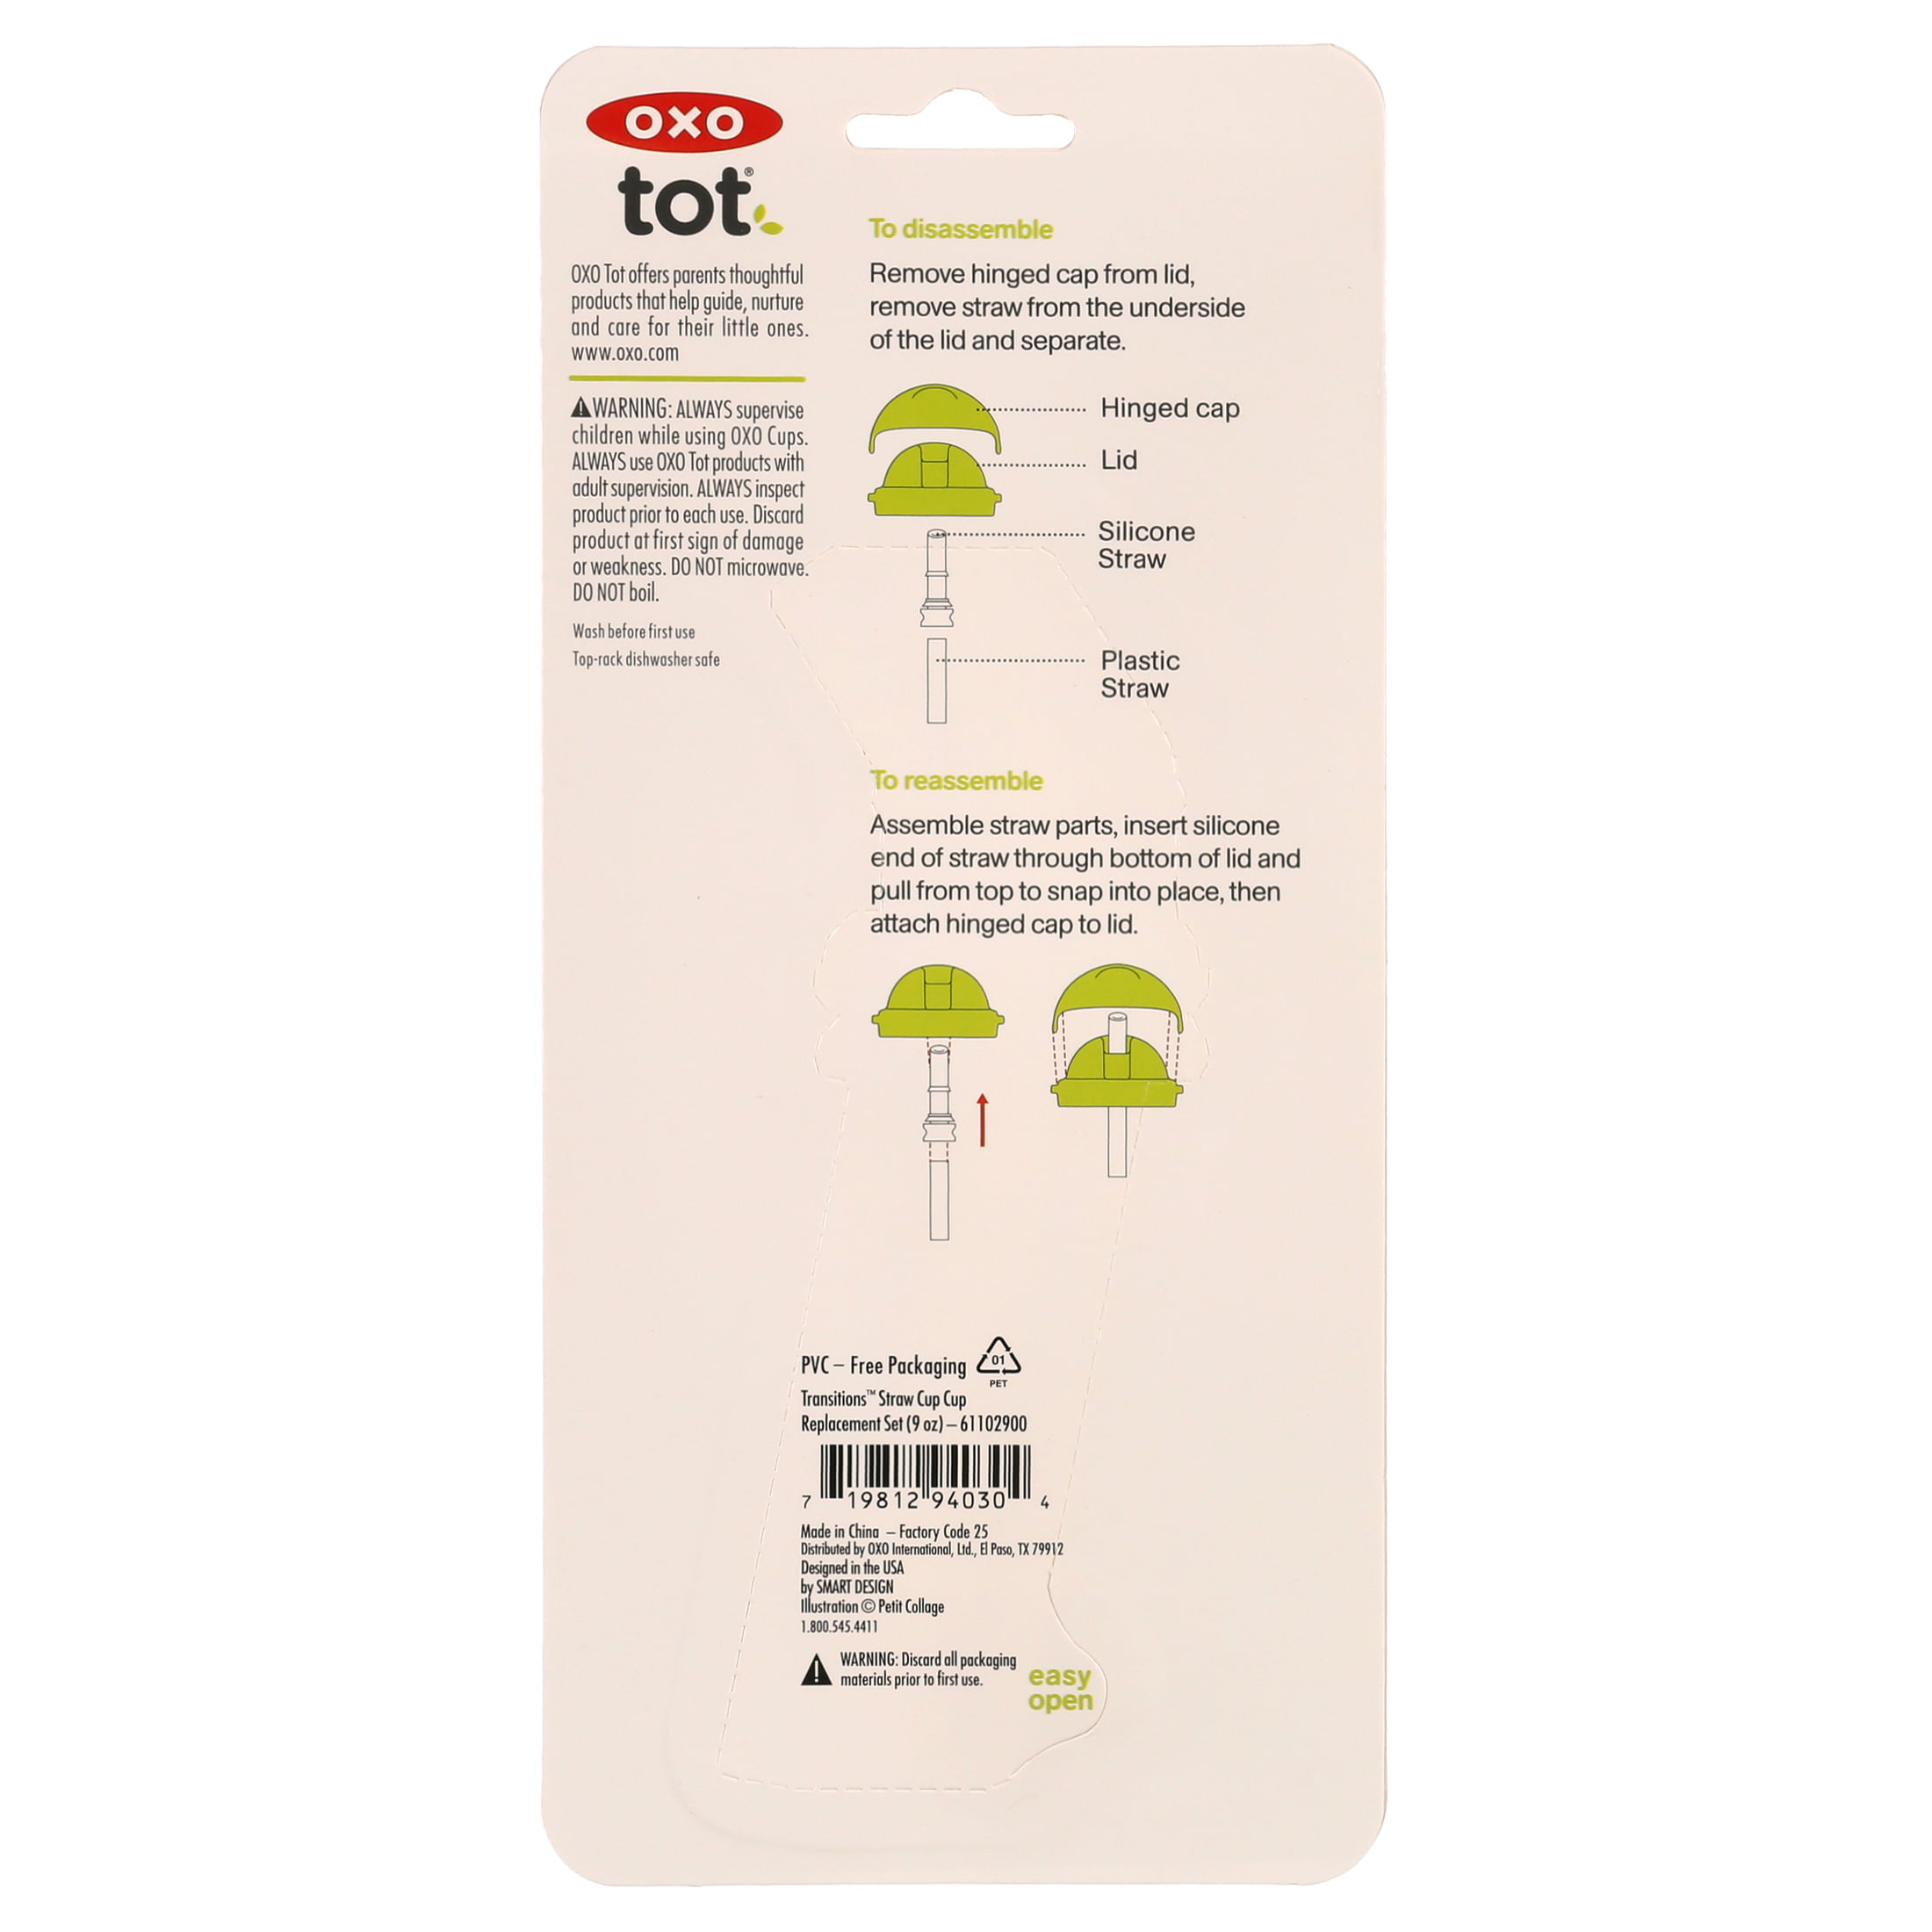 OXO - 2Pk Tot Adventure Water Bottle Replacement Straw